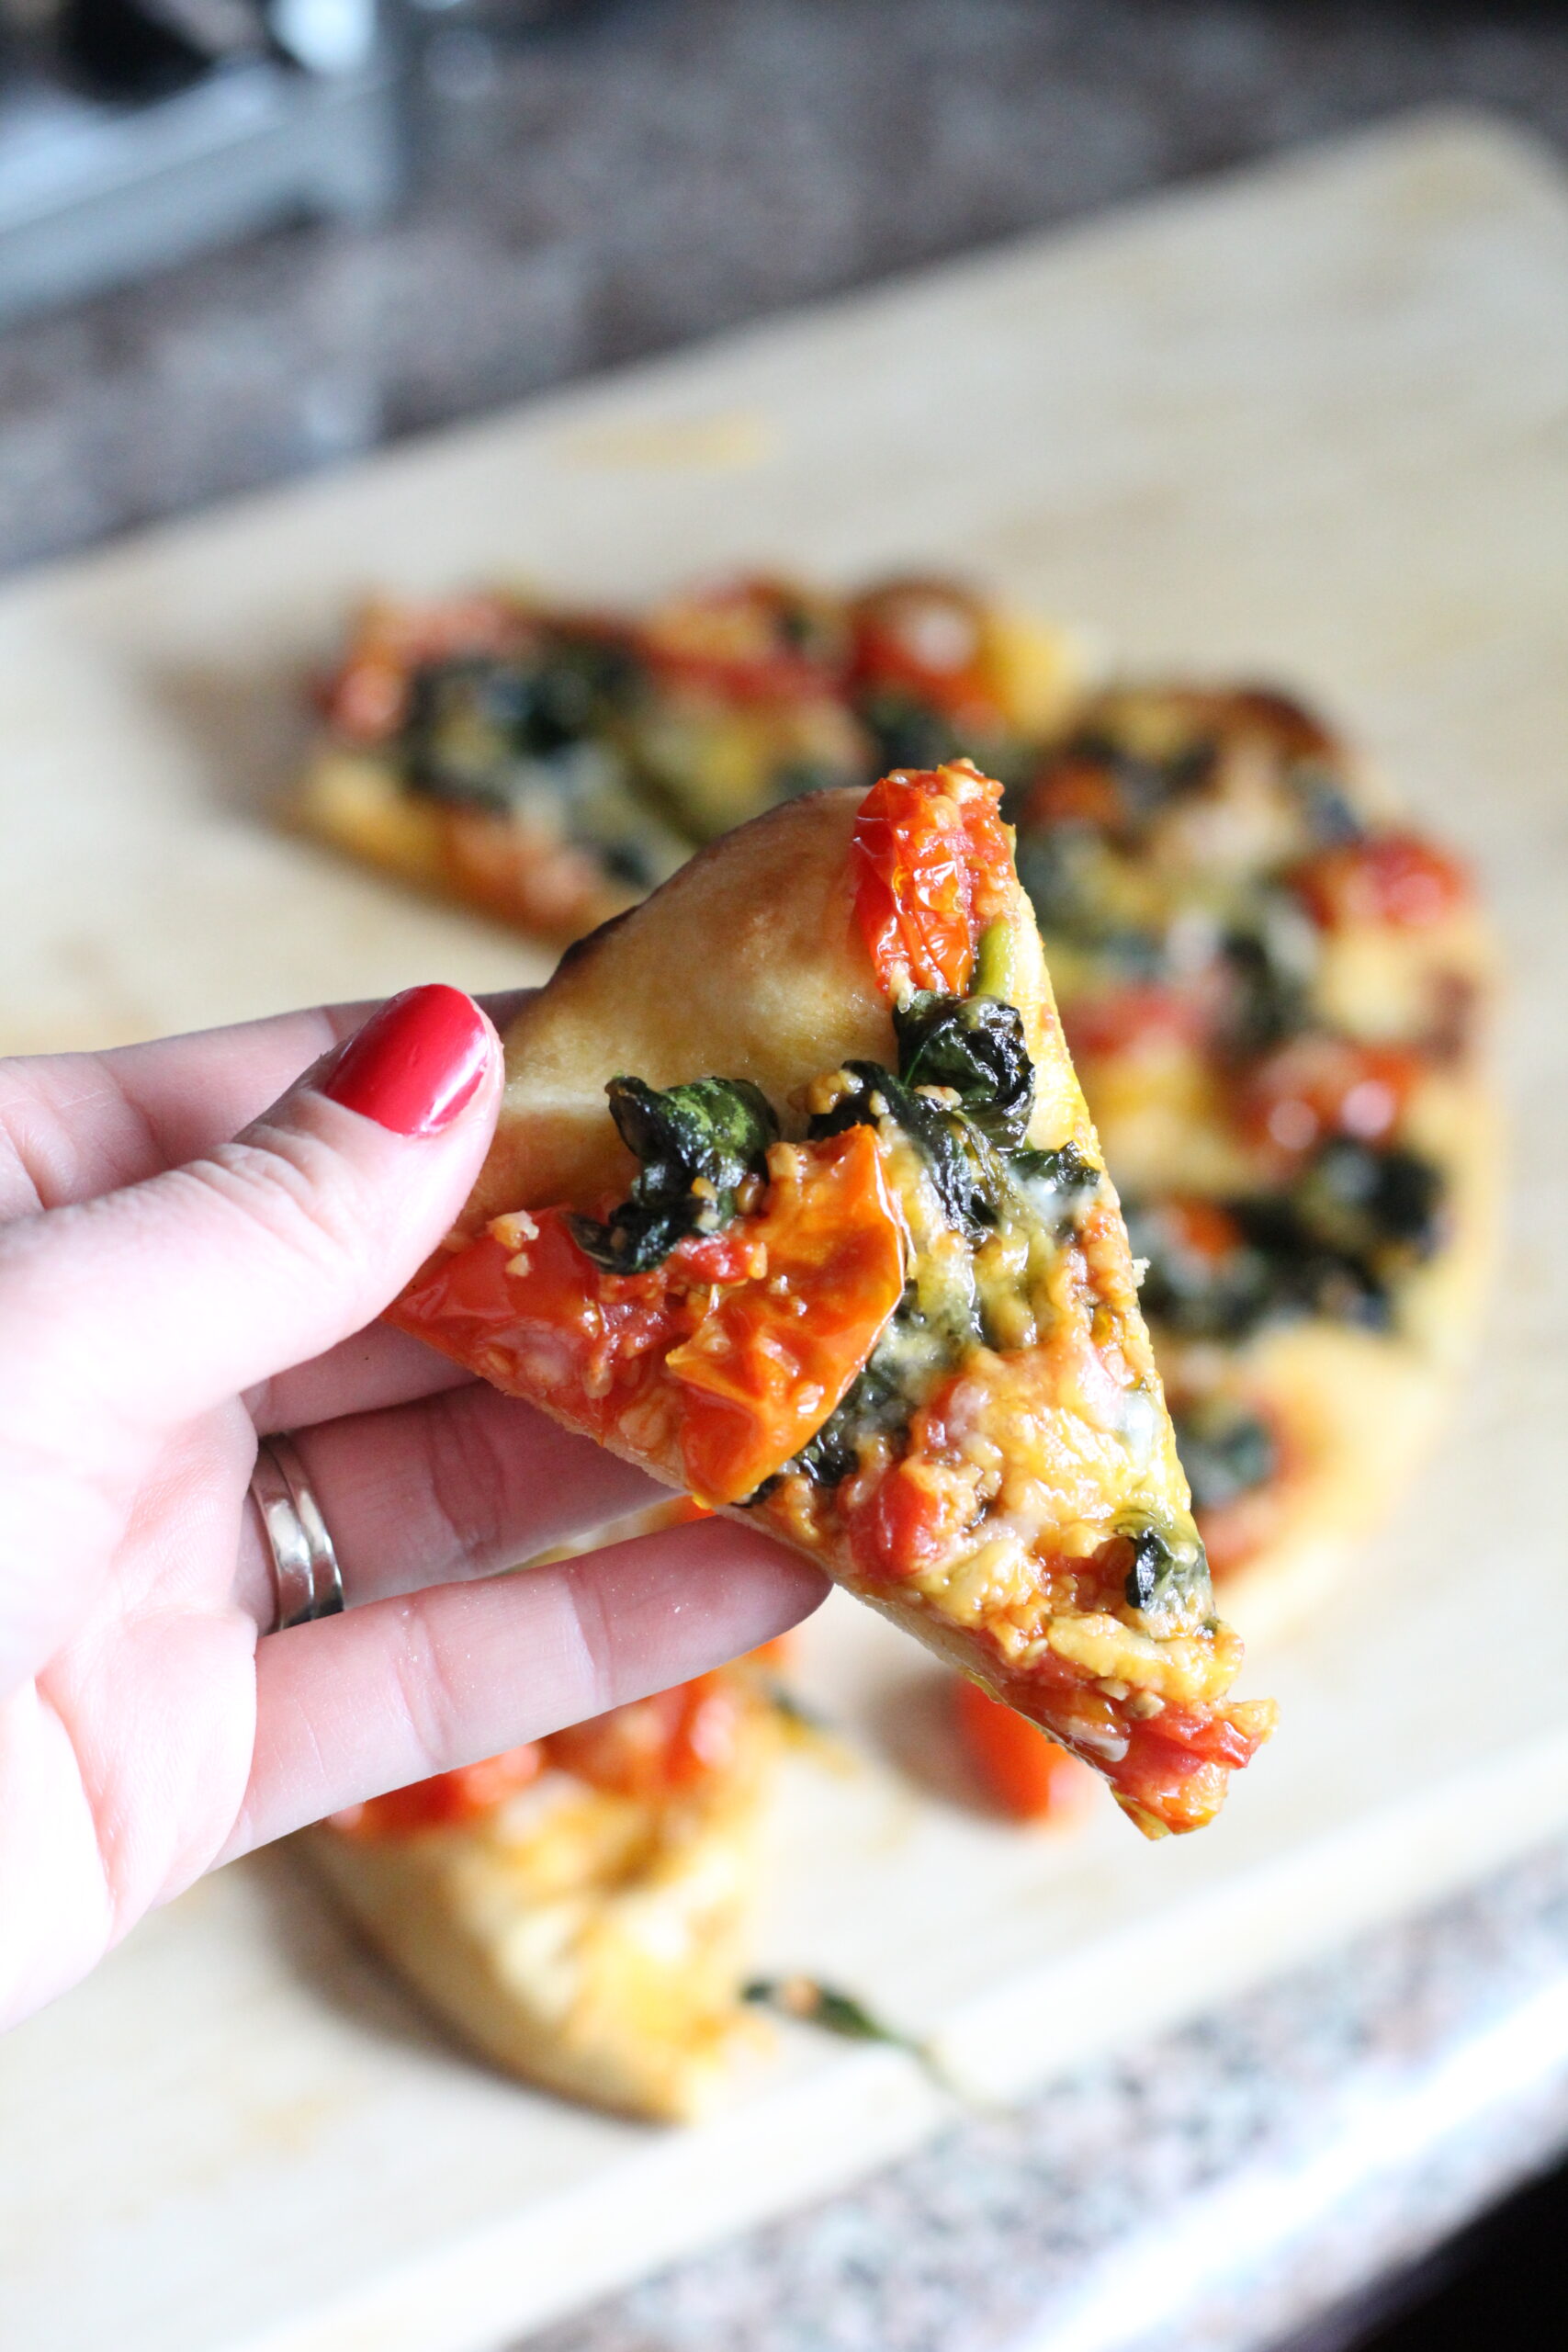 Make this Easy Spinach, Tomato and Garlic Flatbread